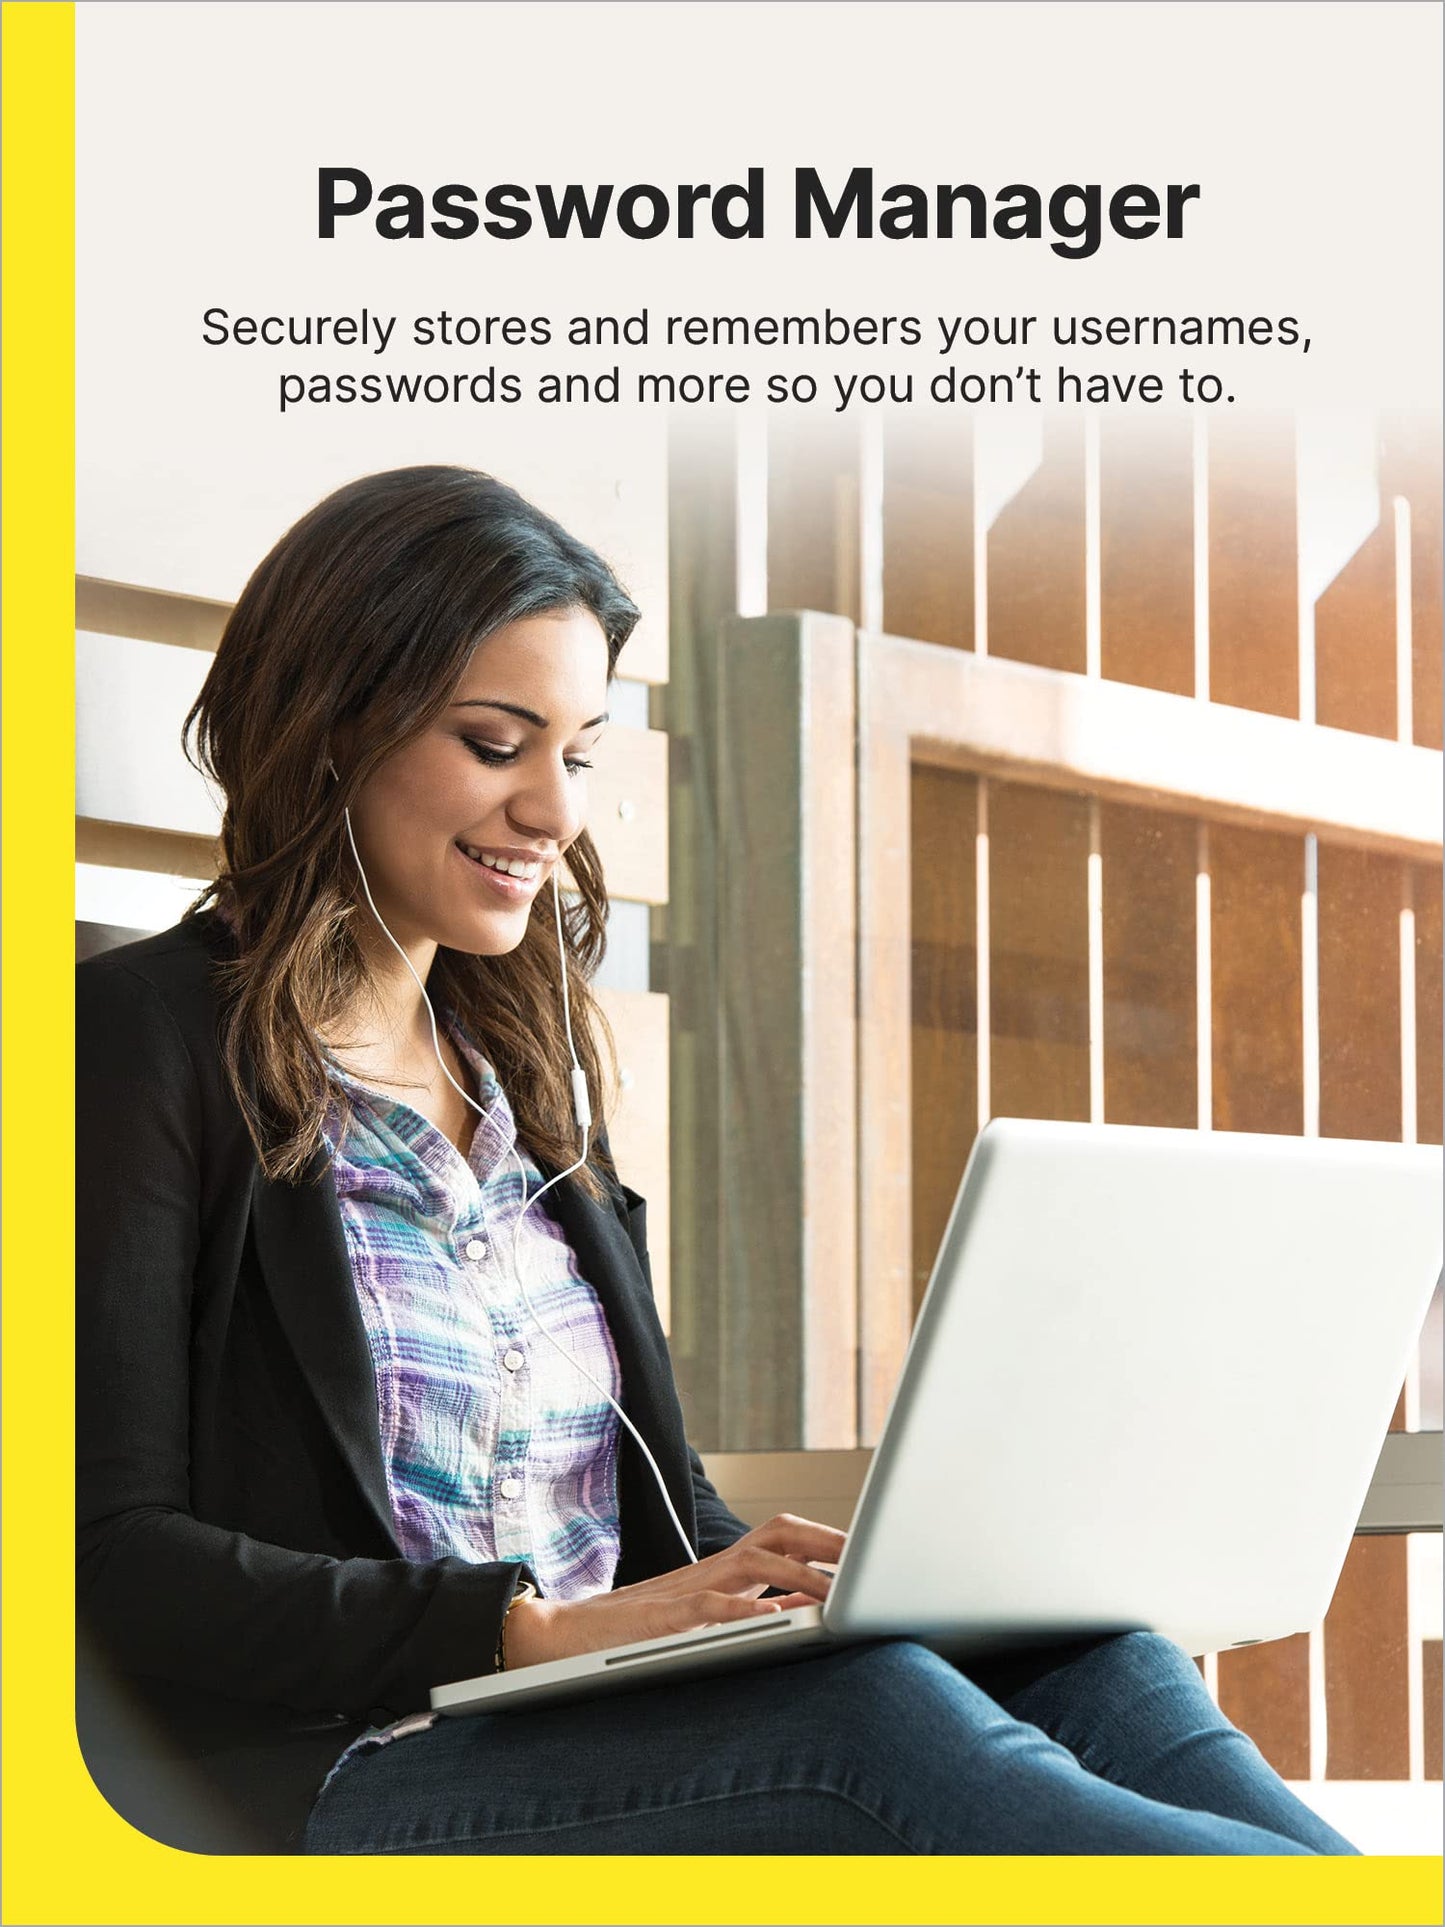 Norton 360 Premium 2024, Antivirus software for 10 Devices with Auto Renewal - Includes VPN, PC Cloud Backup & Dark Web Monitoring [Download]